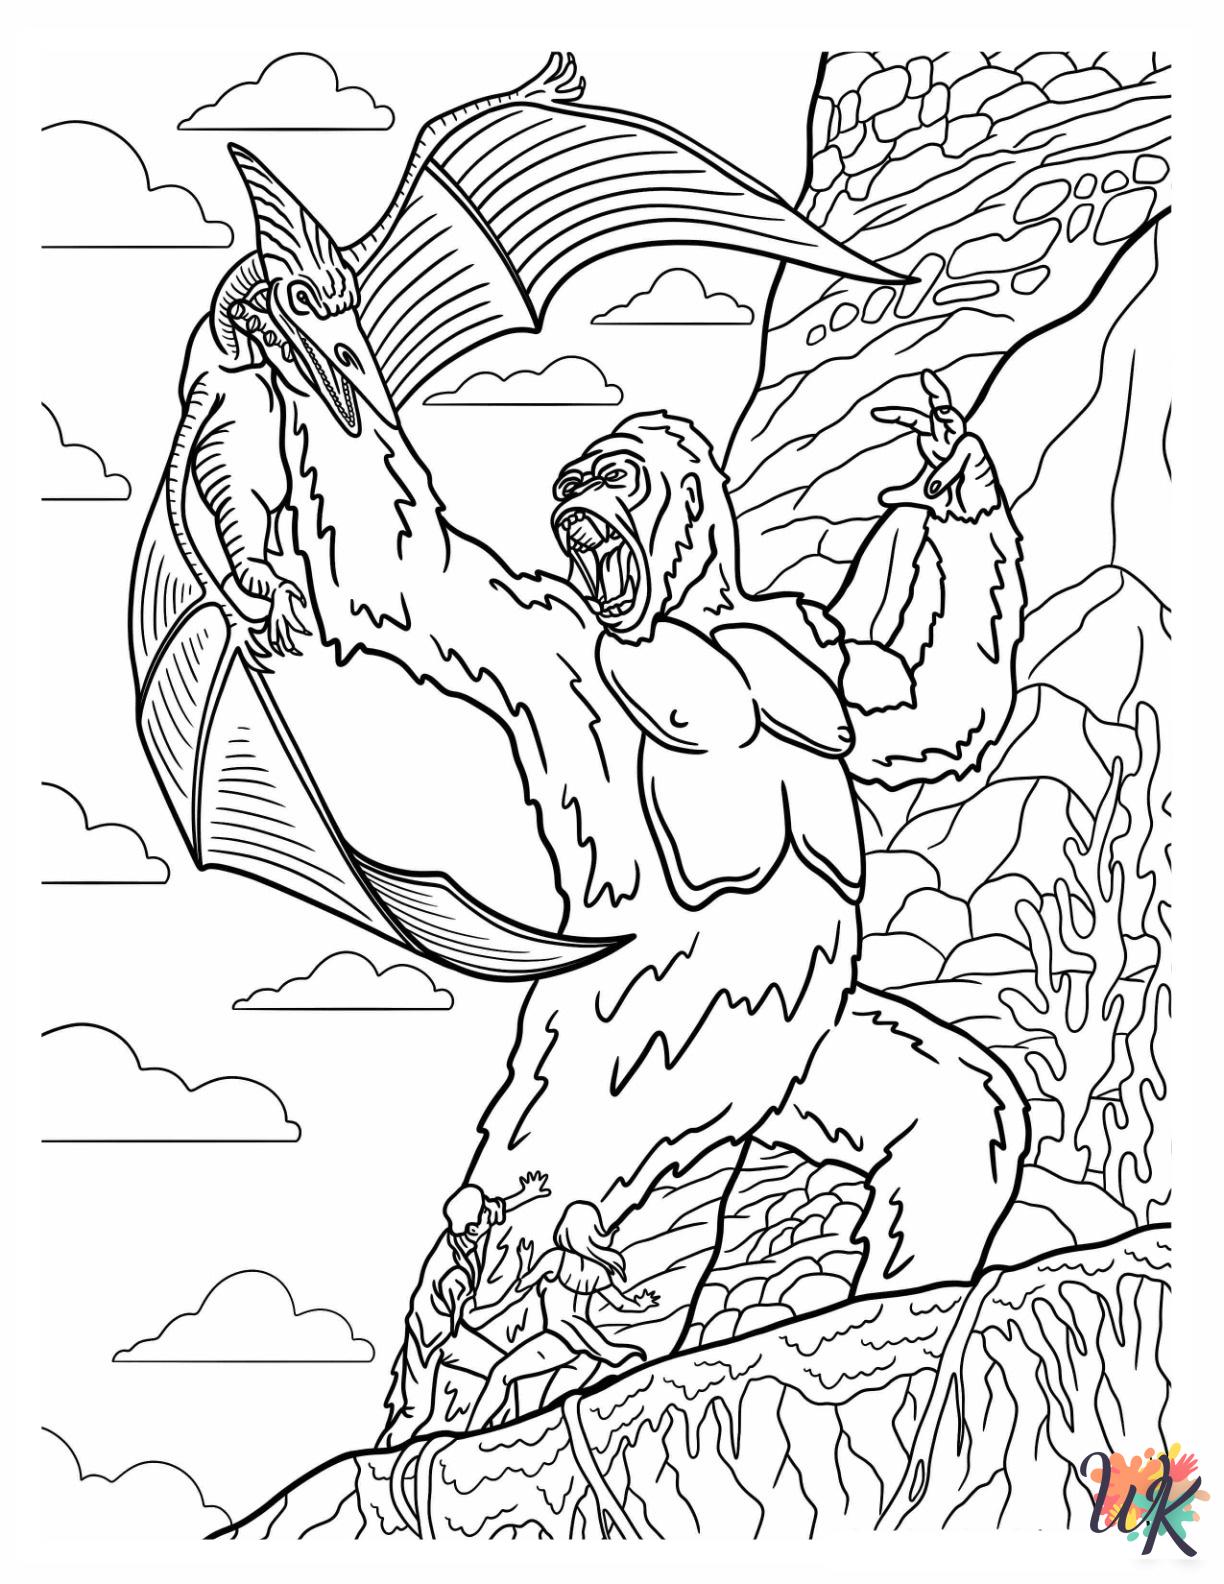 King Kong decorations coloring pages